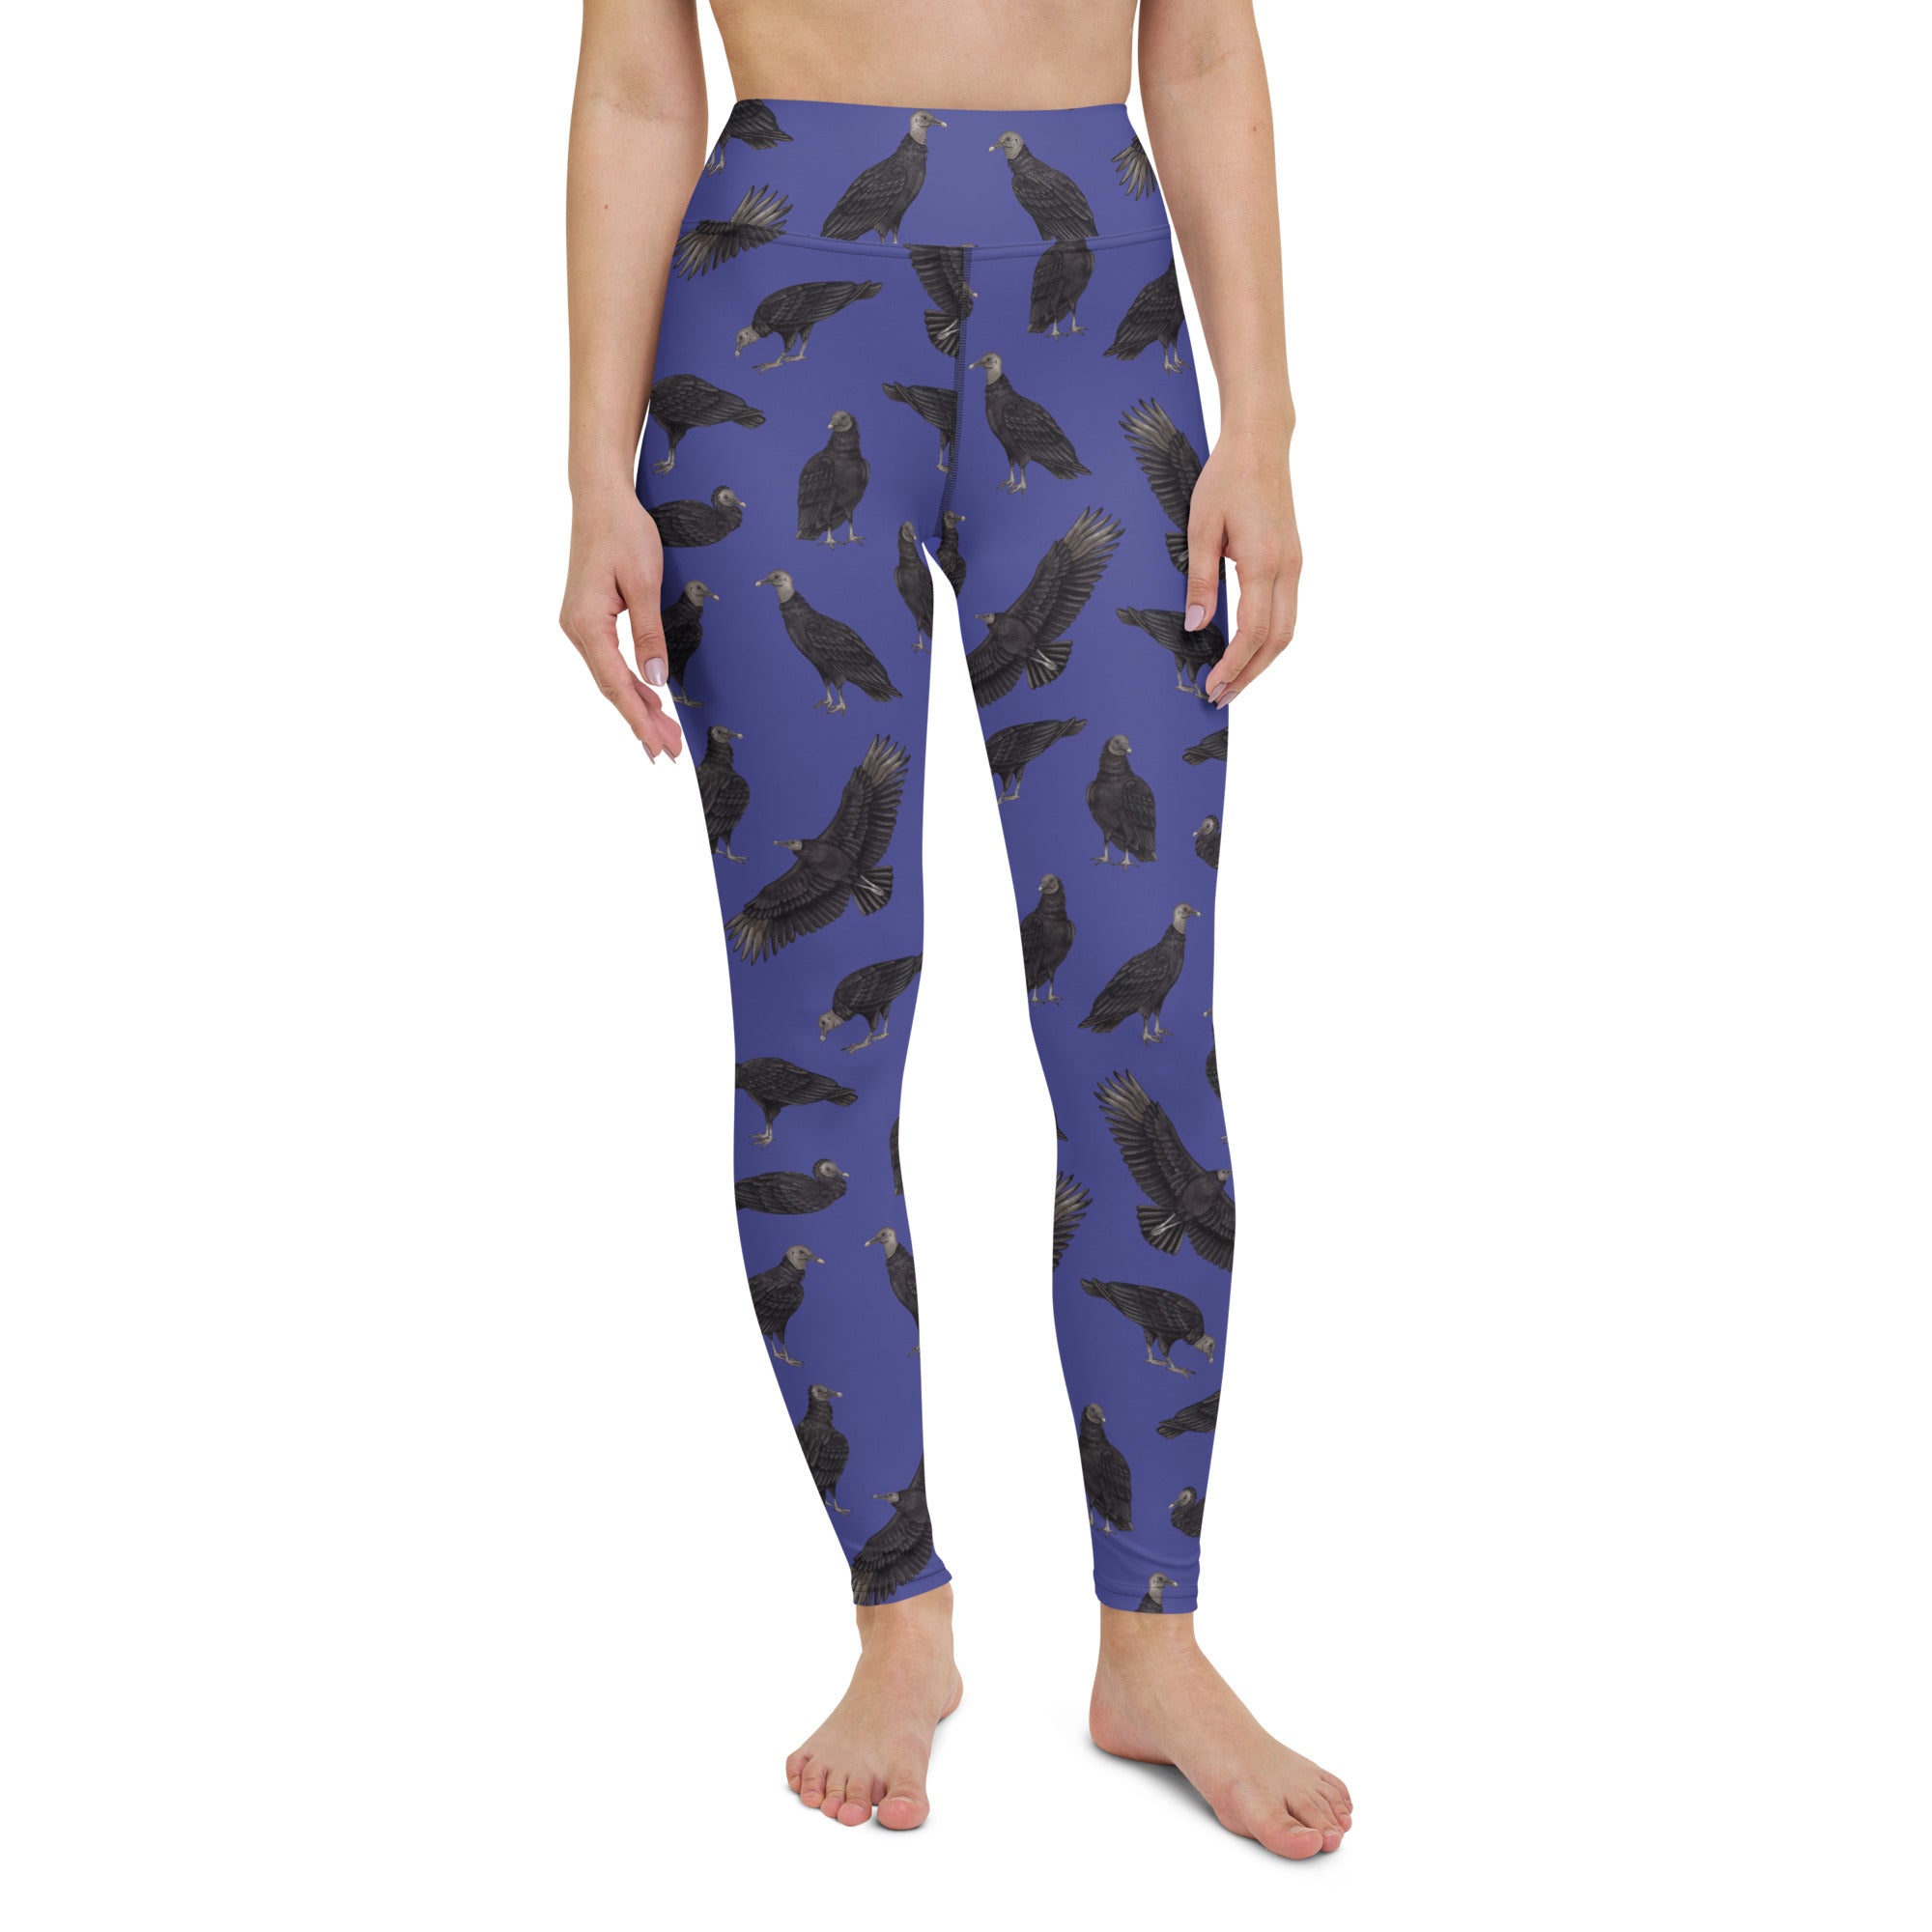 Women's Black Woman All Over Print Joggers